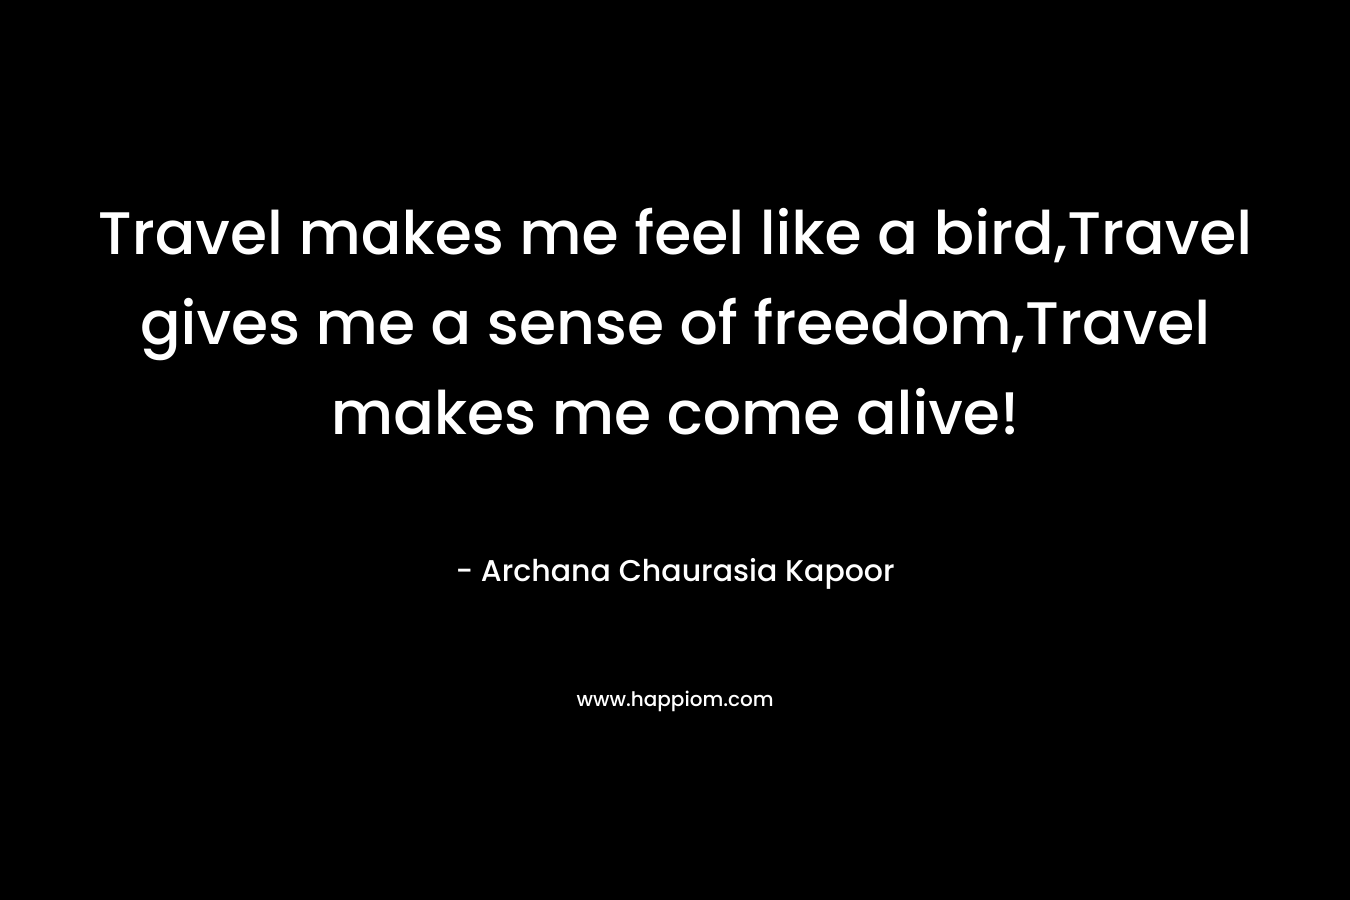 Travel makes me feel like a bird,Travel gives me a sense of freedom,Travel makes me come alive!